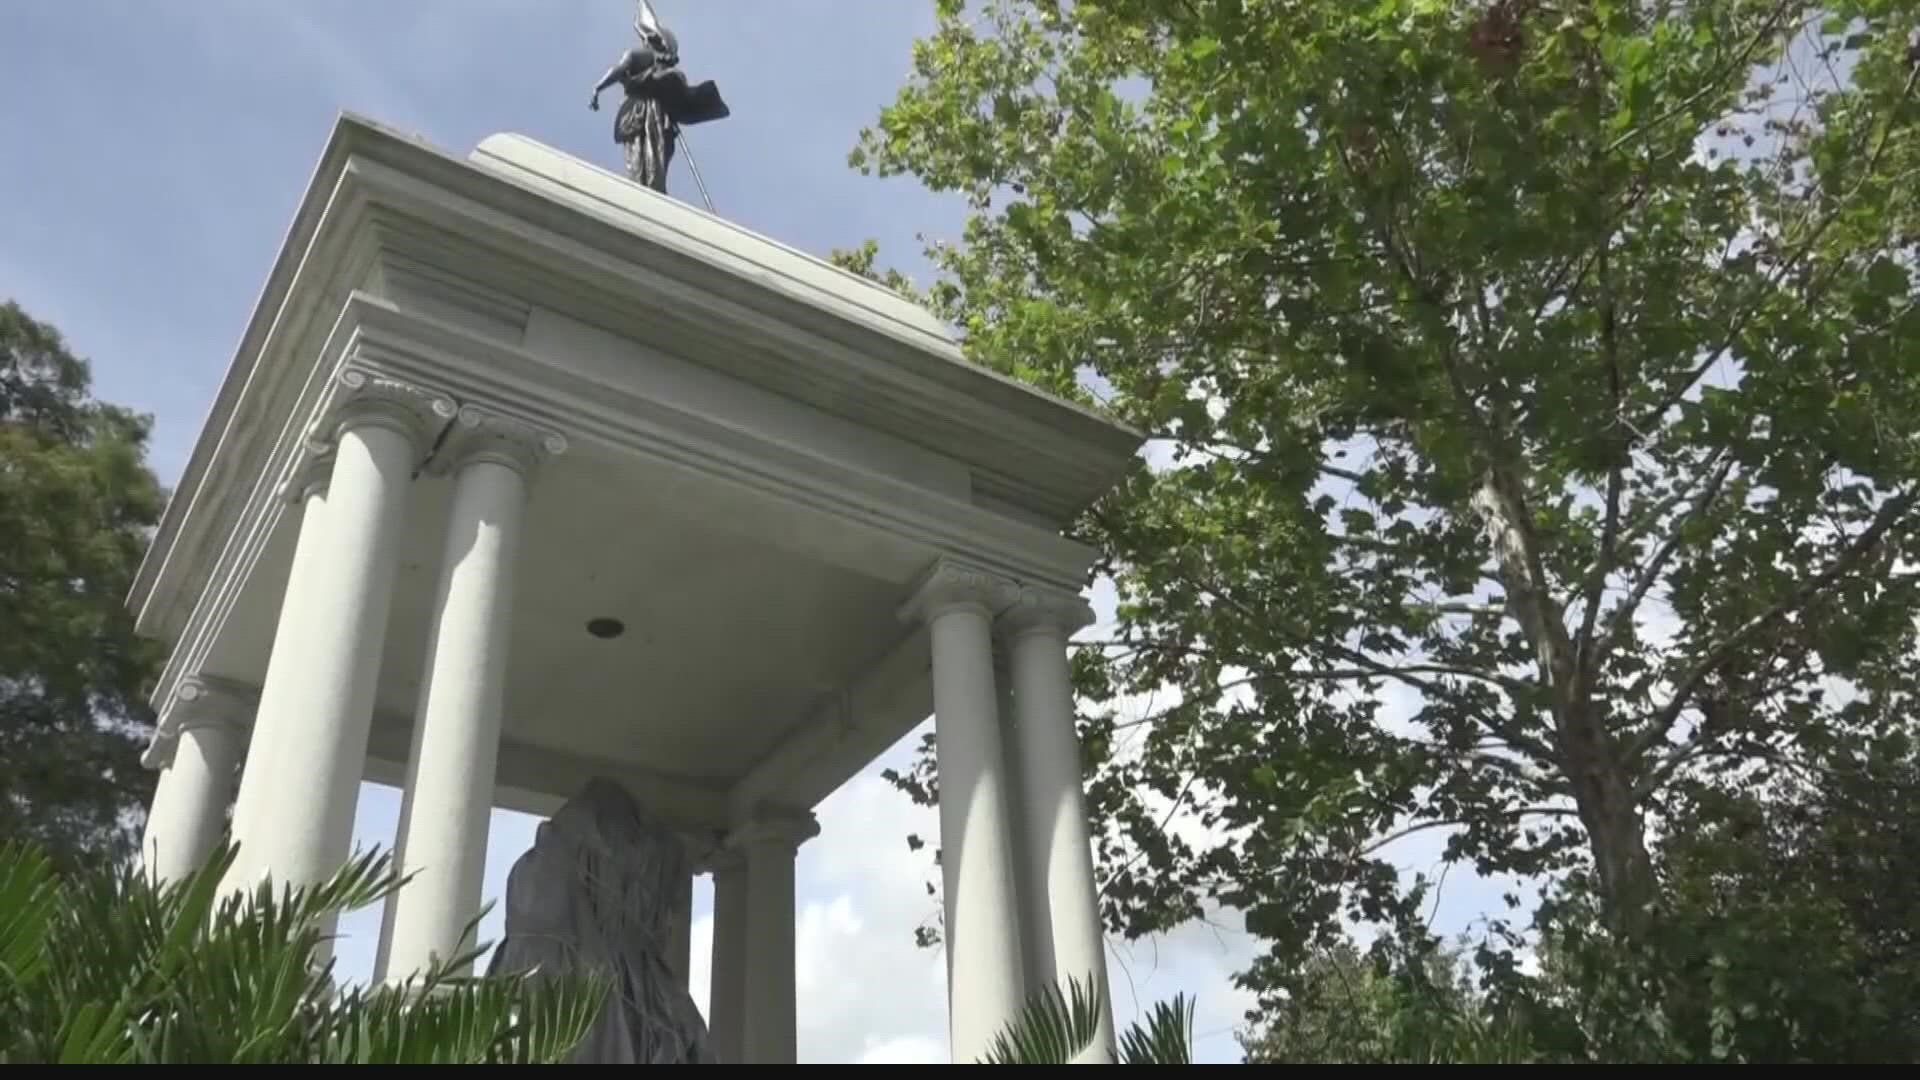 Jacksonville City Council member Matt Carlucci sponsored the bill, which would have created a deadline for coming up with a plan to remove the monuments.